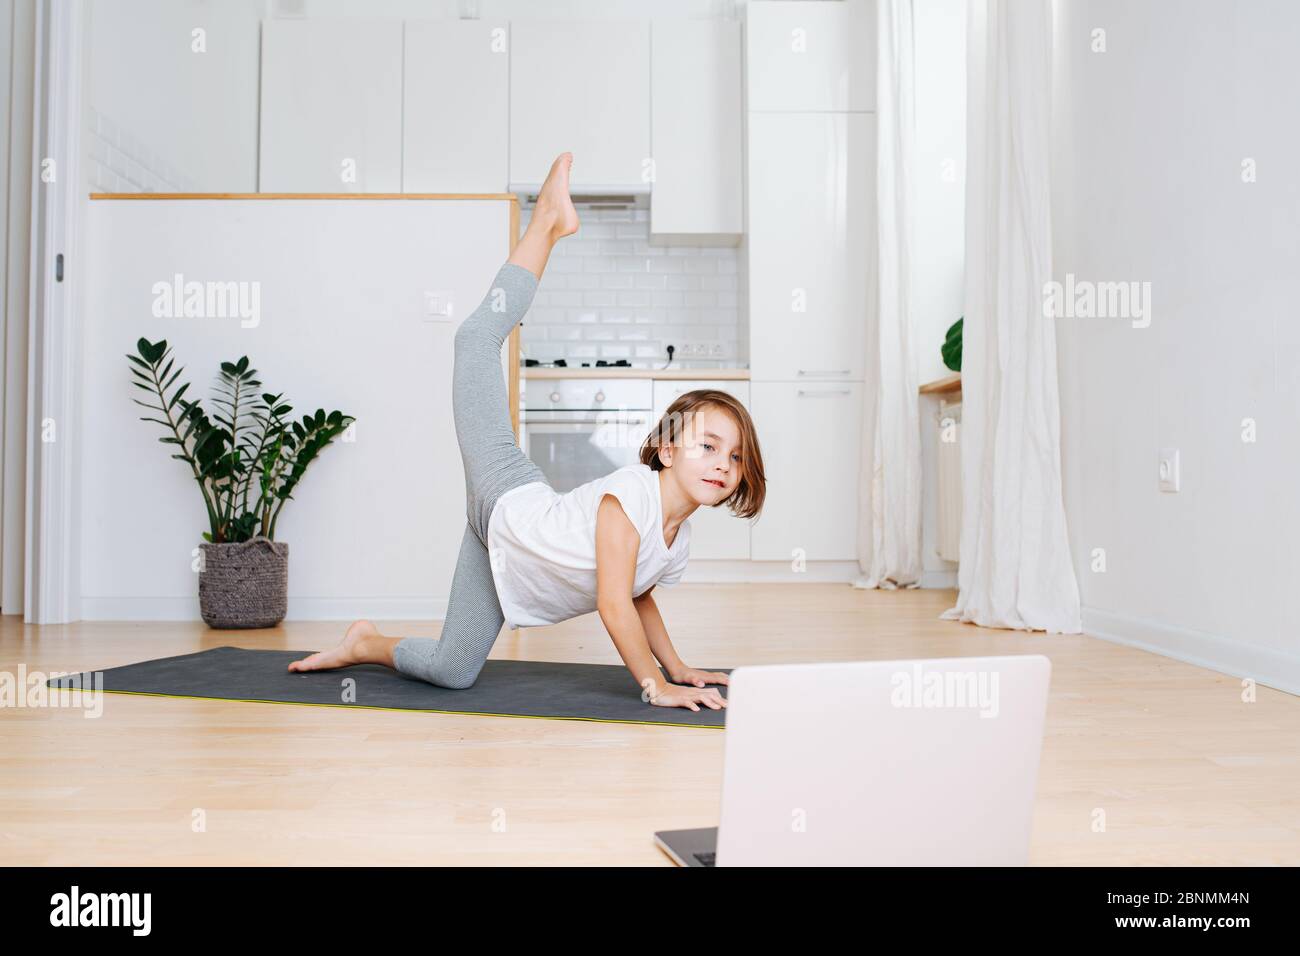 Little school age girl doing gymnastics at home in isolation Stock Photo